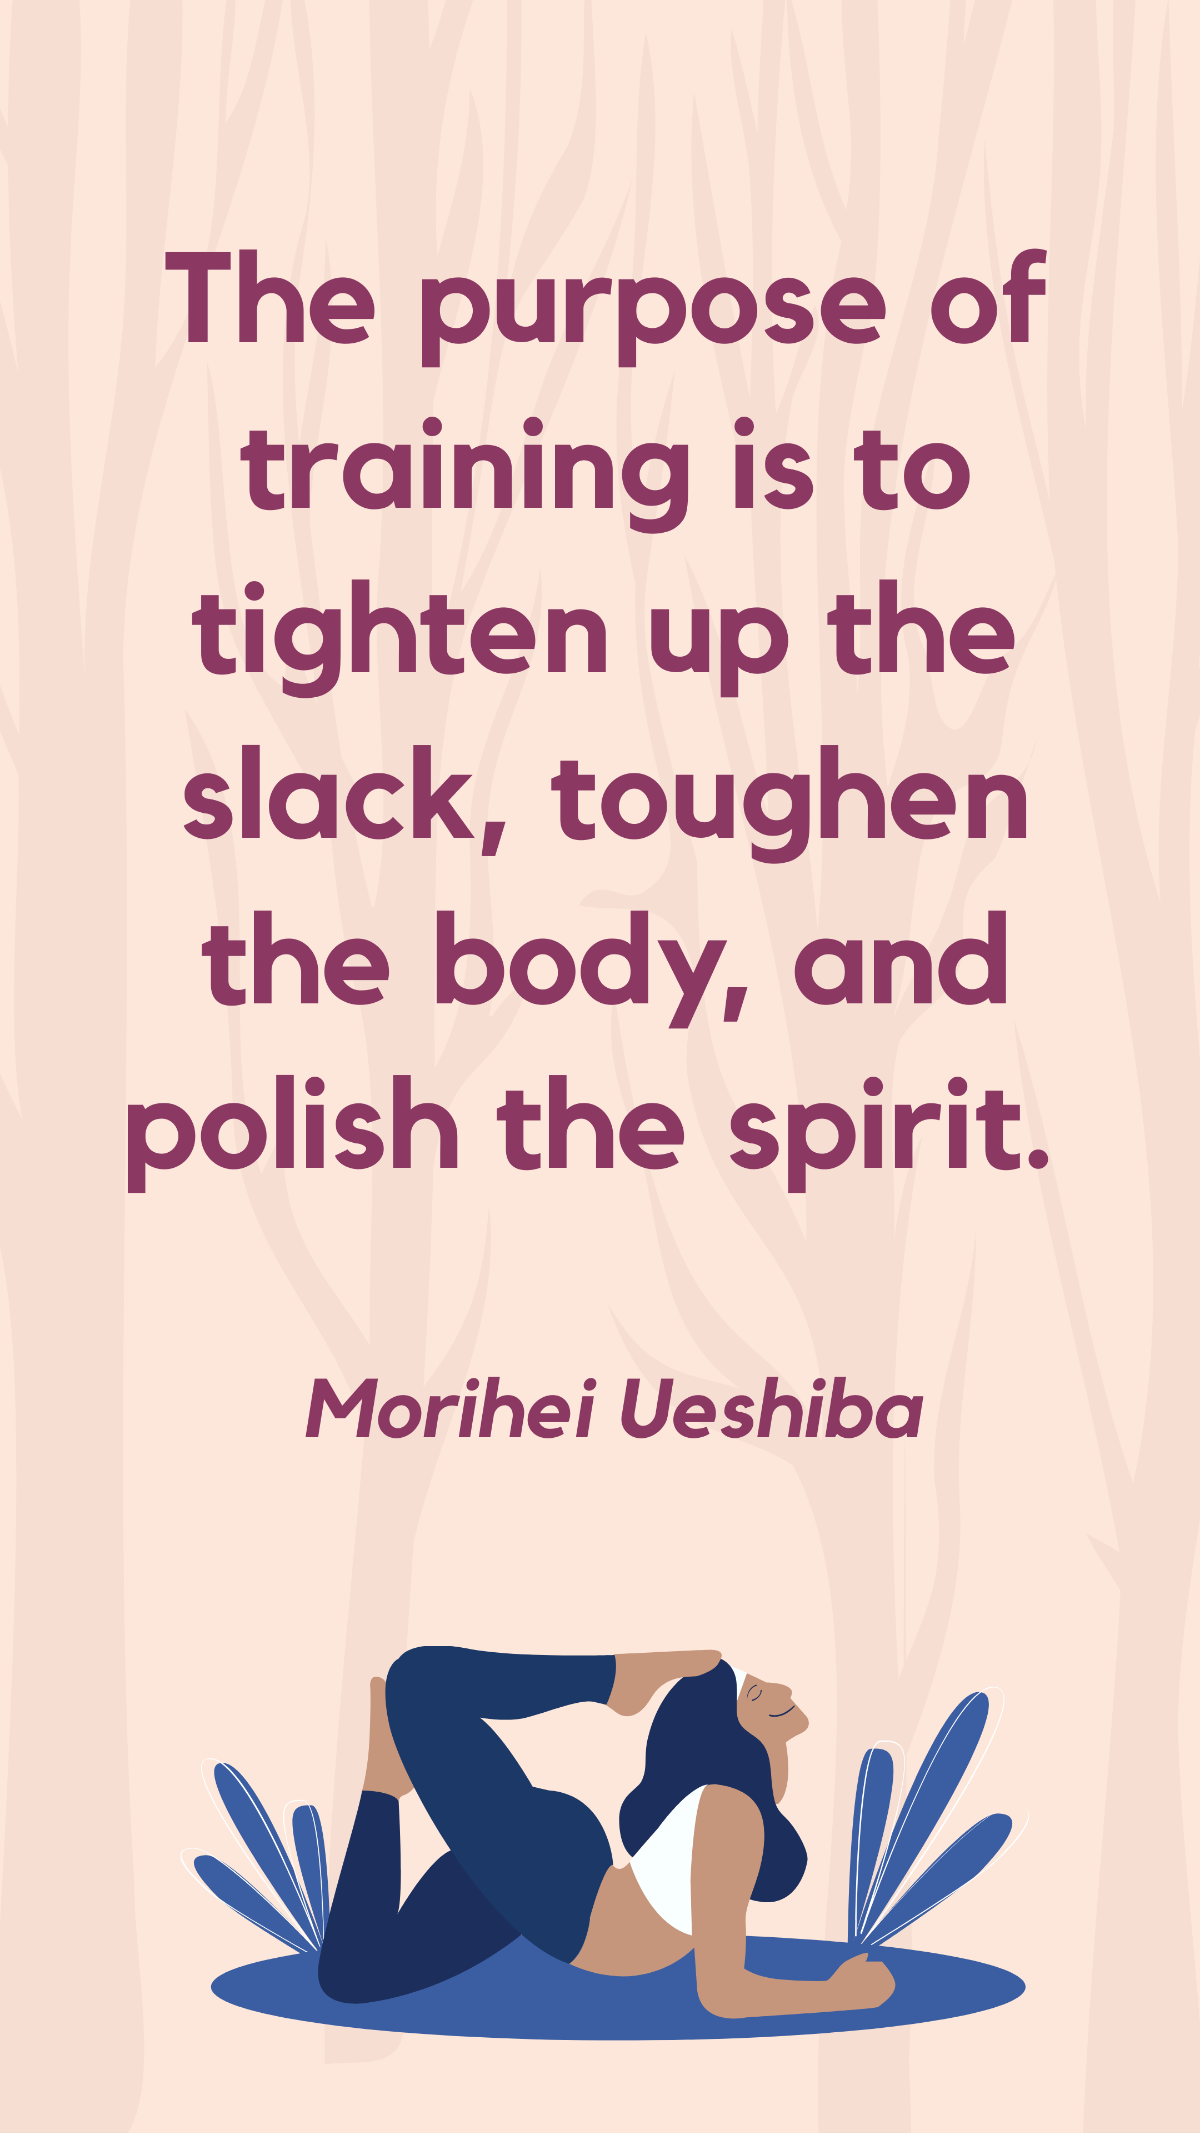 Free Morihei Ueshiba - The purpose of training is to tighten up the slack, toughen the body, and polish the spirit. Template